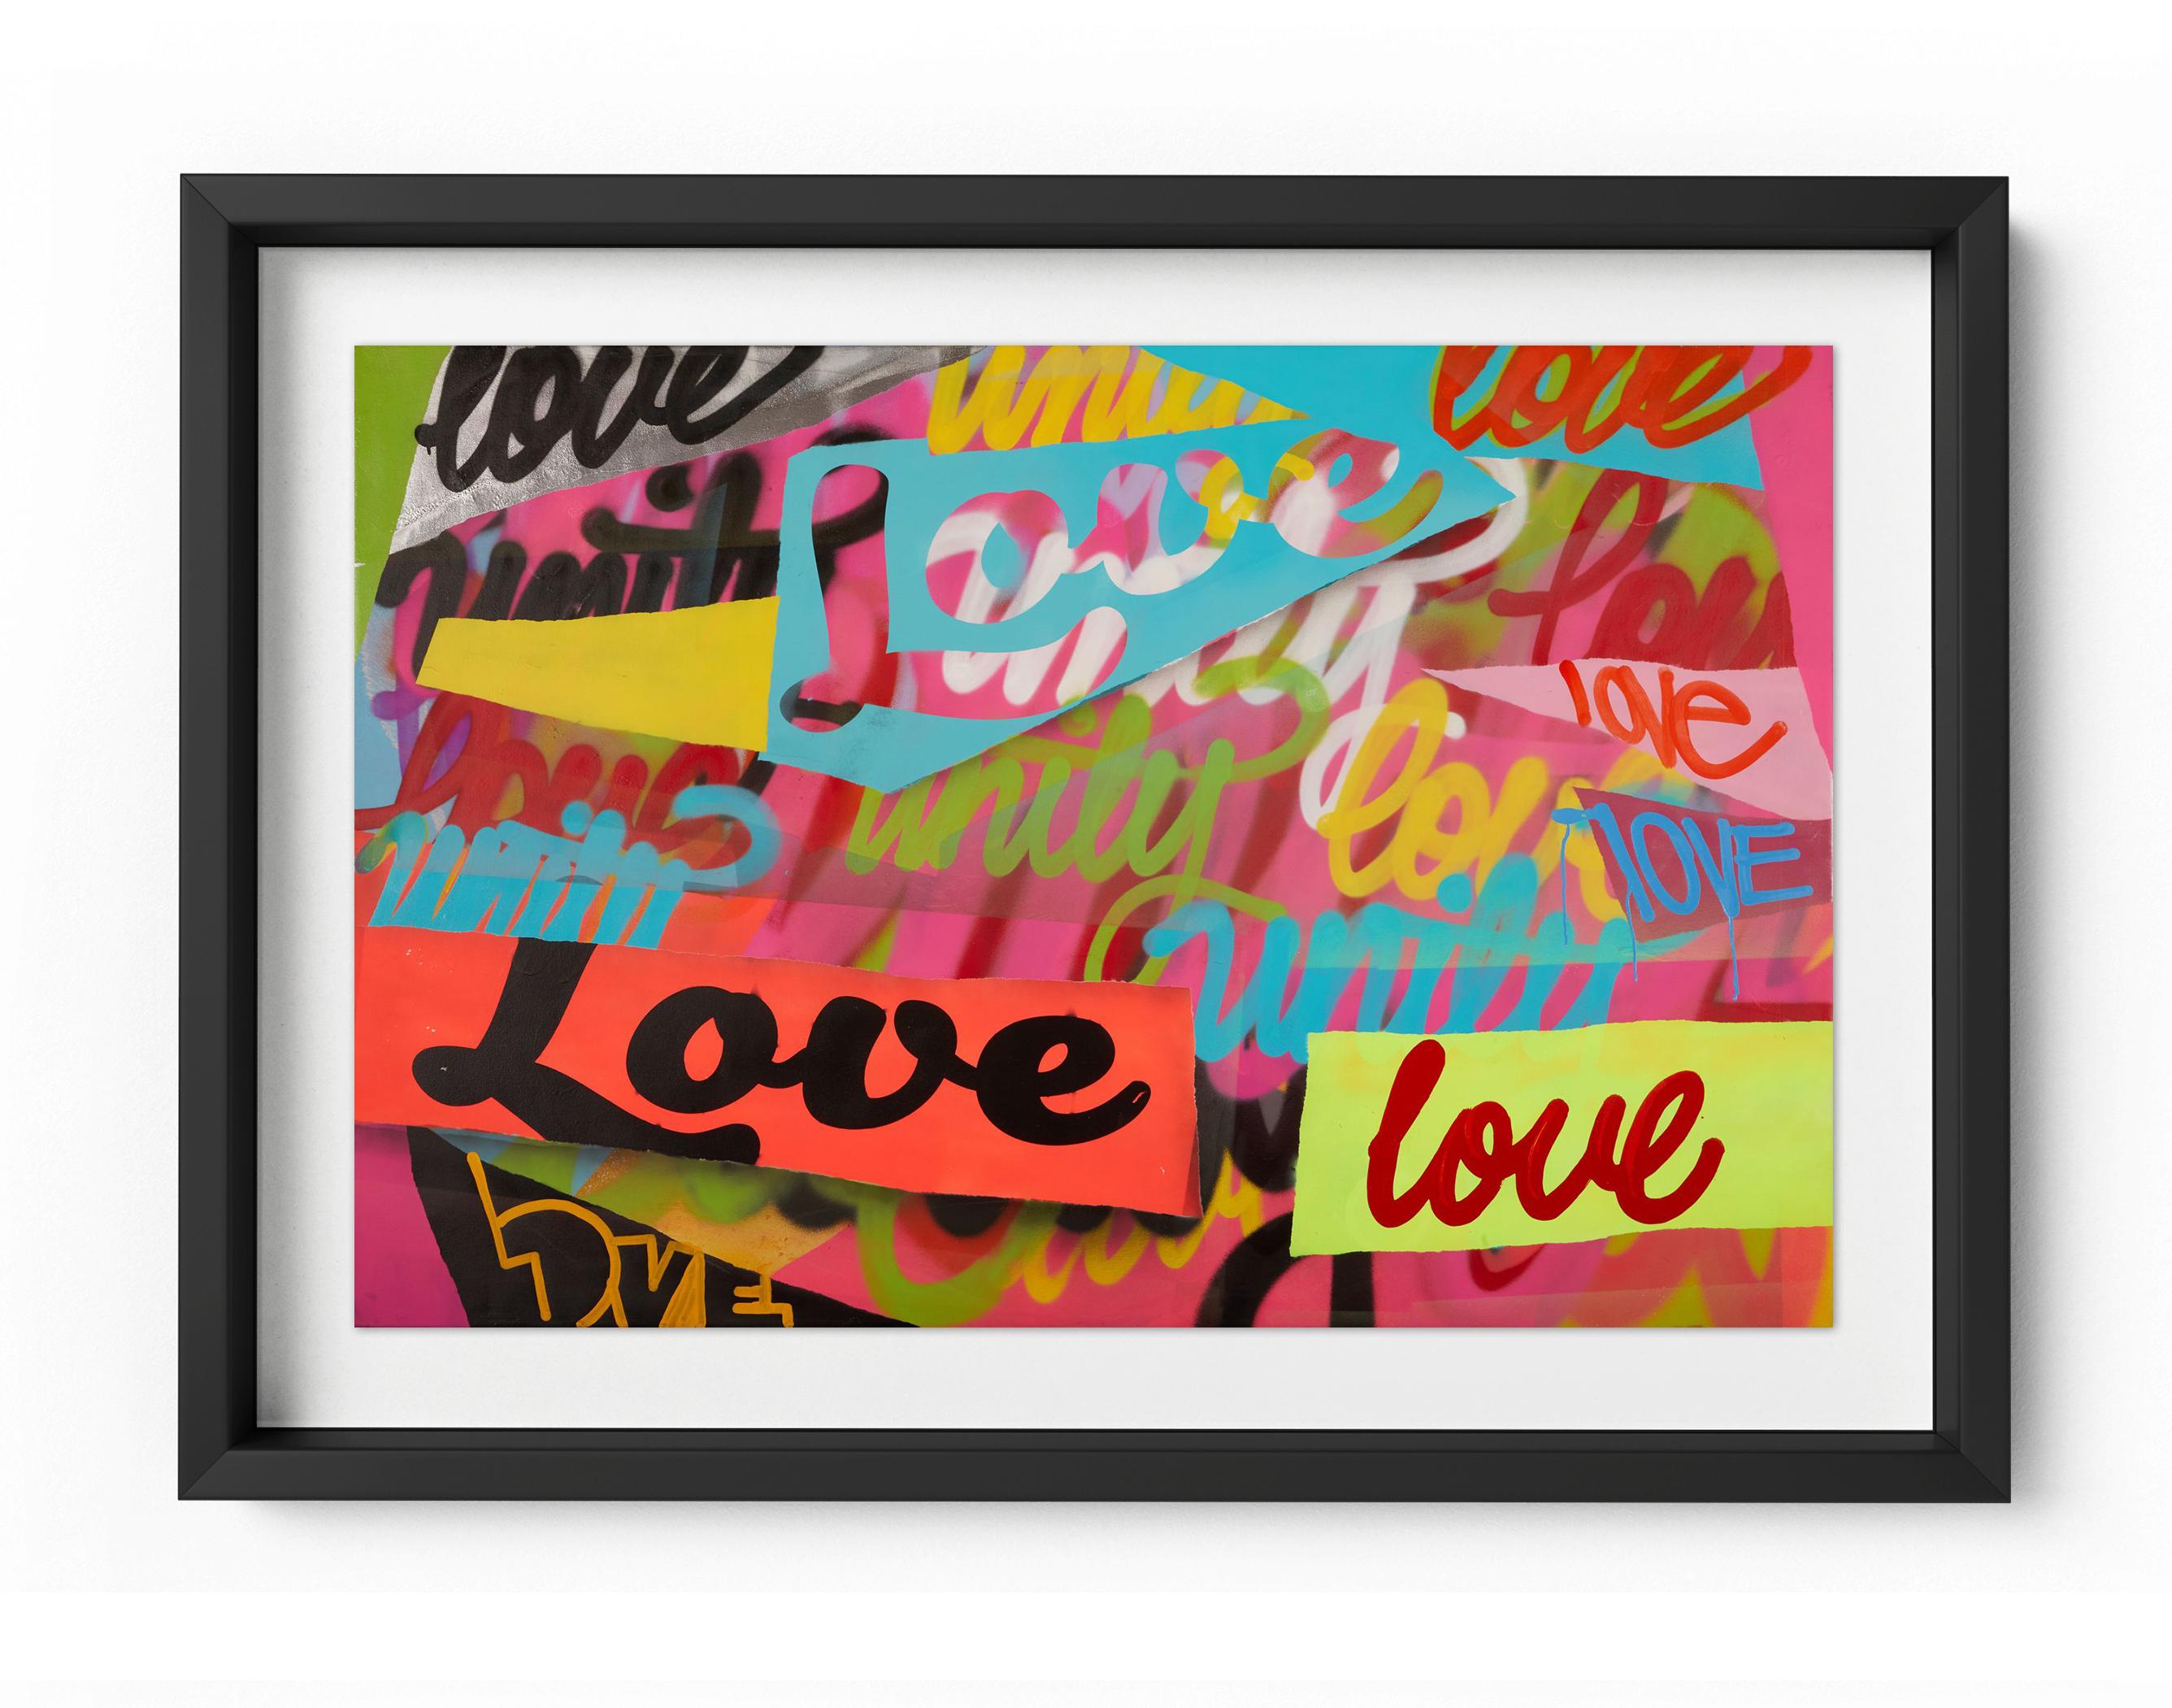 Karlos Marquez Abstract Print - Unity & Love - Framed Limited Edition Print - Contemporary - Graffiti Inspired